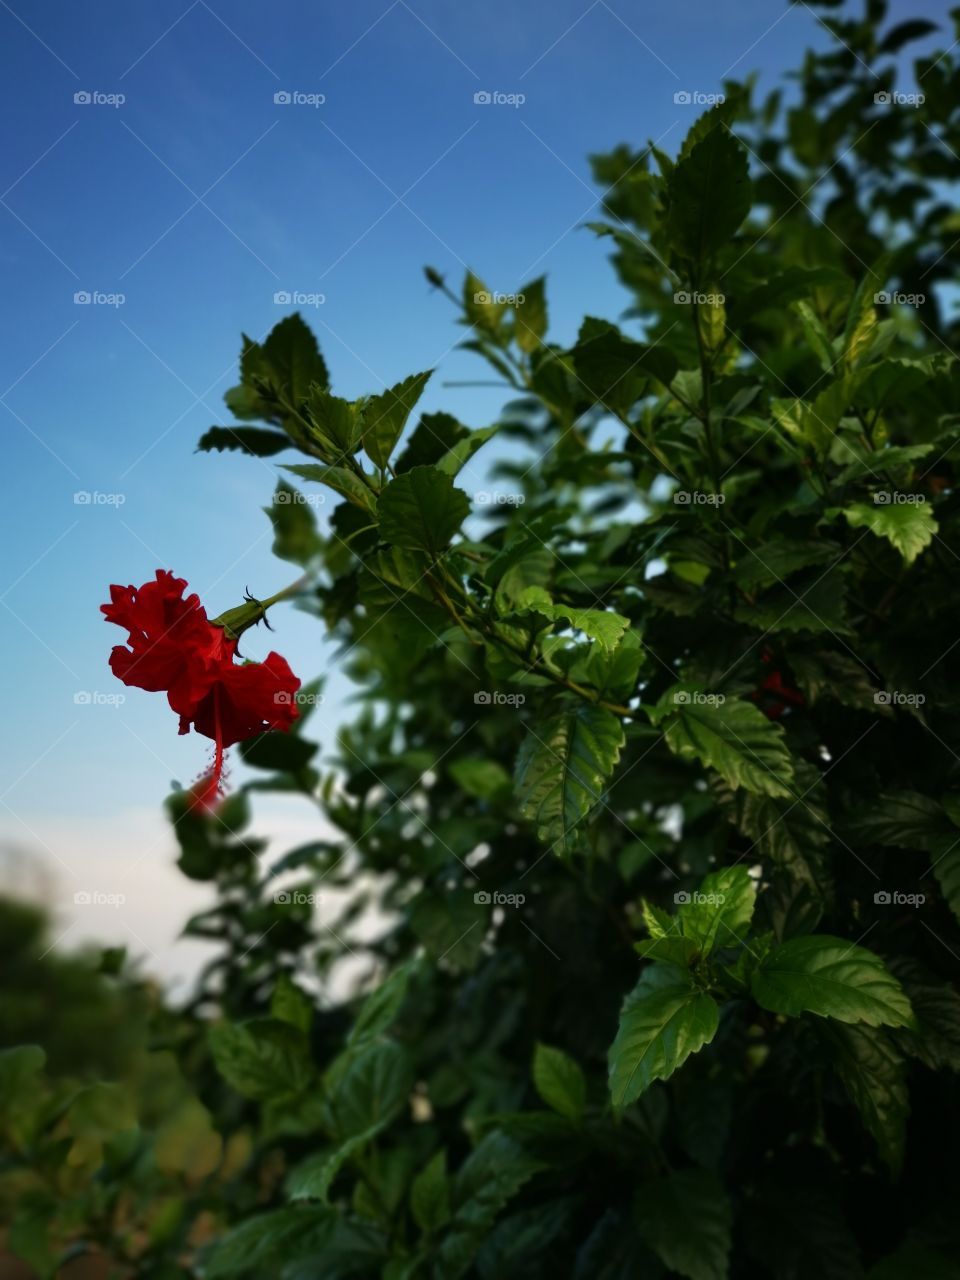 A red flower among so many green leaves with the blue sky in the background.